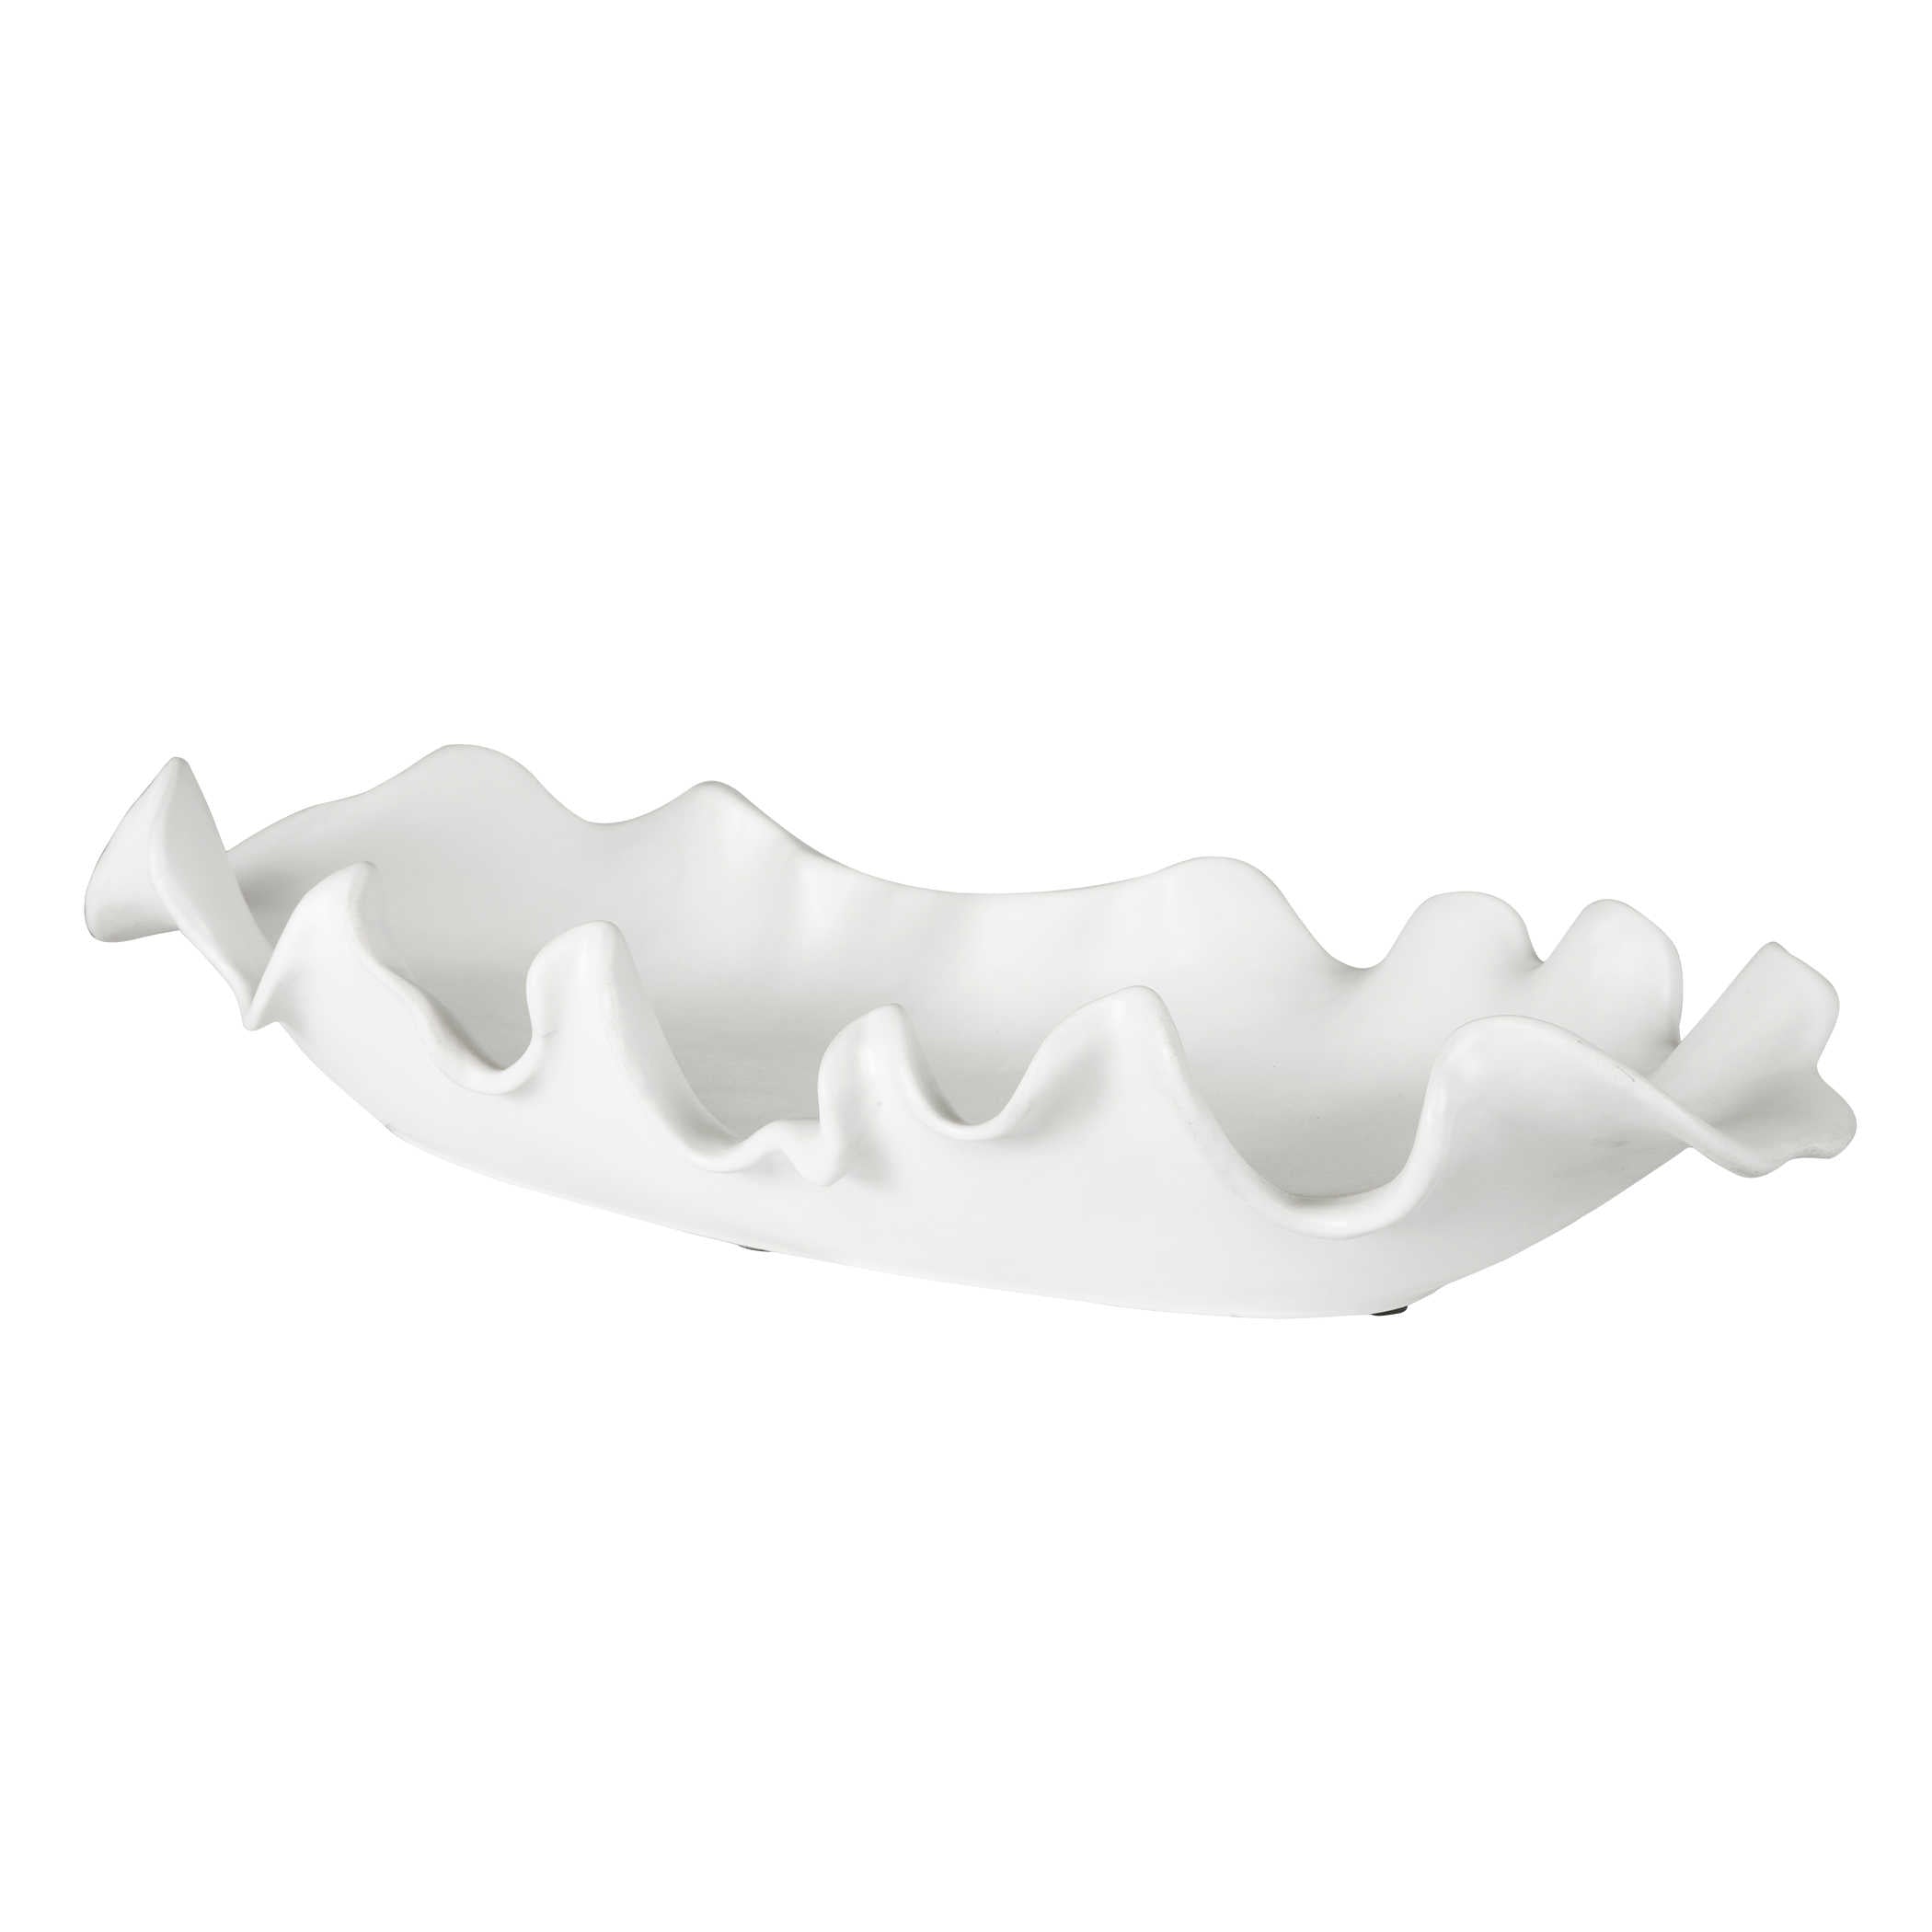 Uttermost Ruffled Feathers Modern White Bowl Décor/Home Accent Uttermost EARTHENWARE  